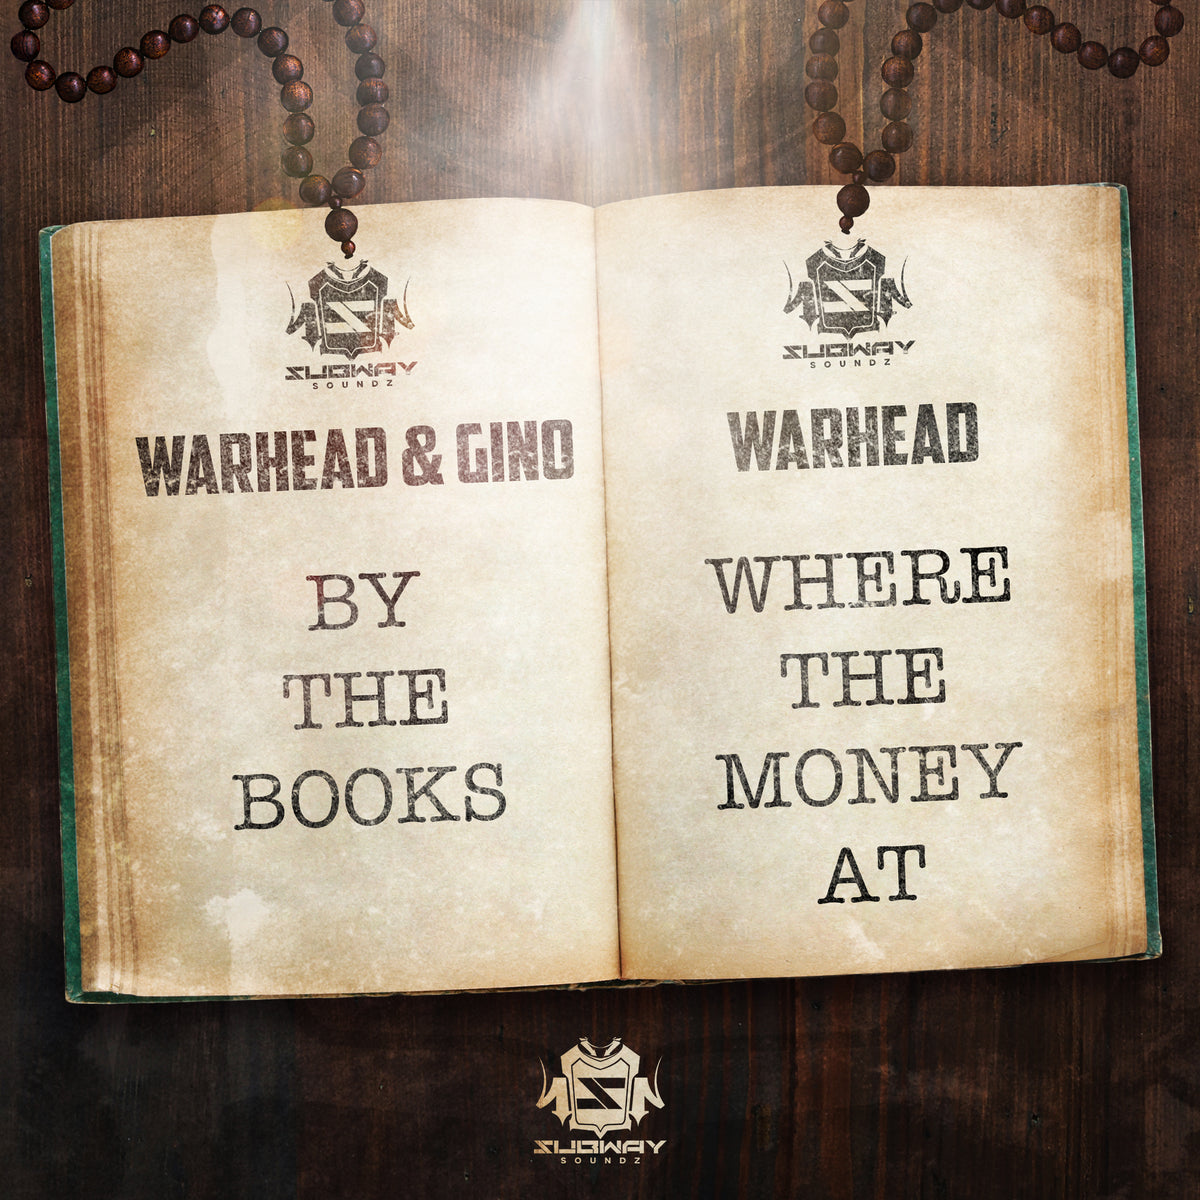 SSLD 080 - Warhead & Gino 'By The Books' | Warhead 'Where The Money At'